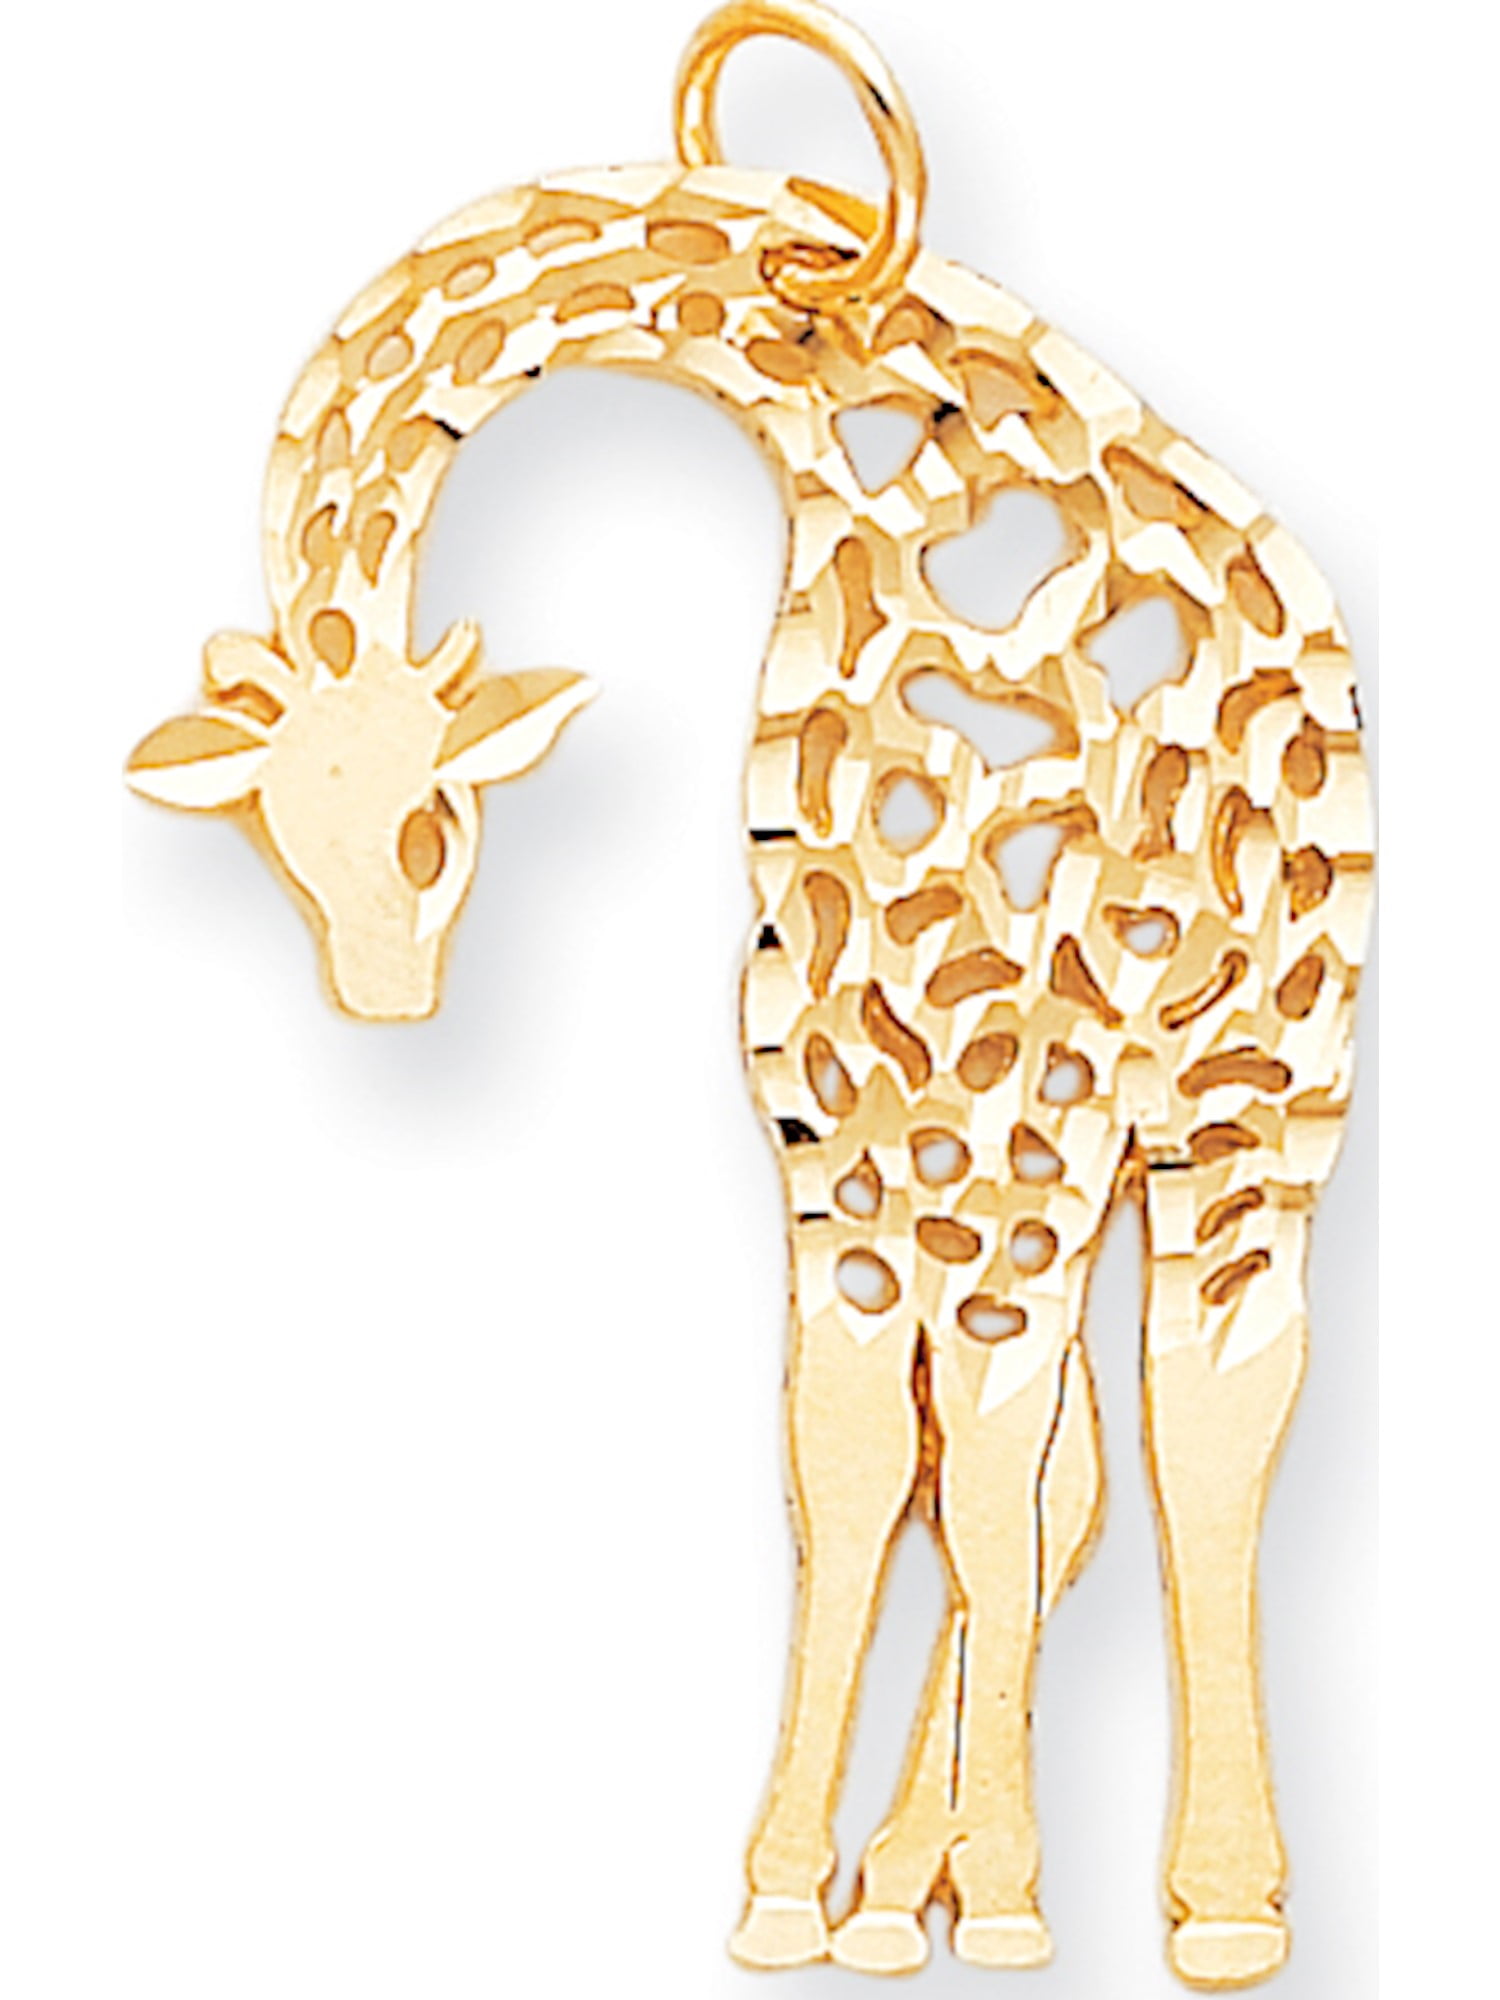 Details about   New Real Solid 14K Gold Cut-Out Giraffe Charm Pendant 